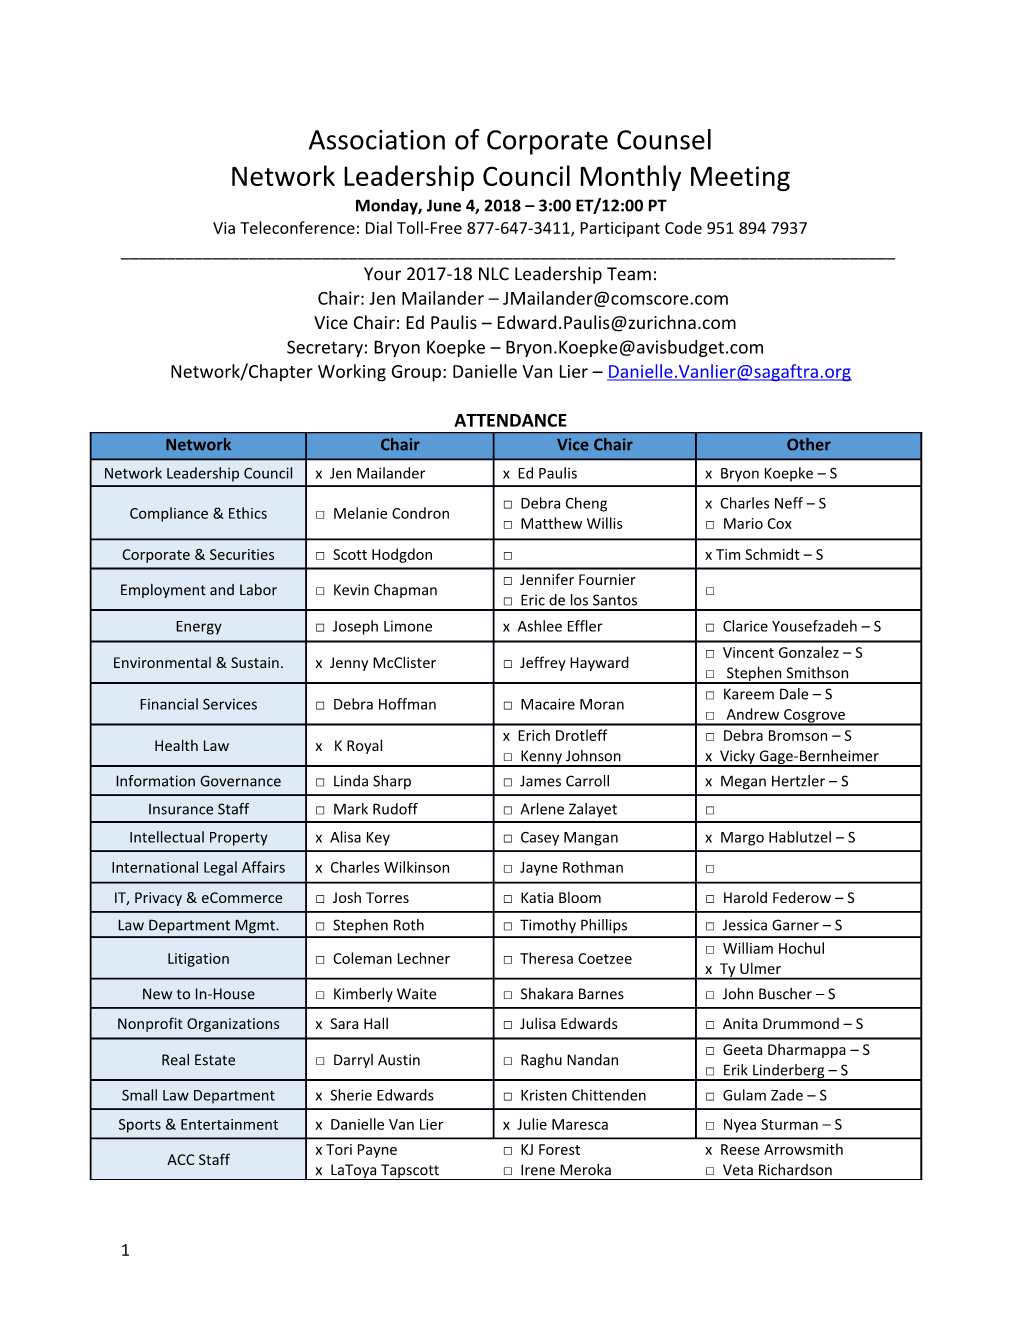 Network Leadership Council Monthly Meeting